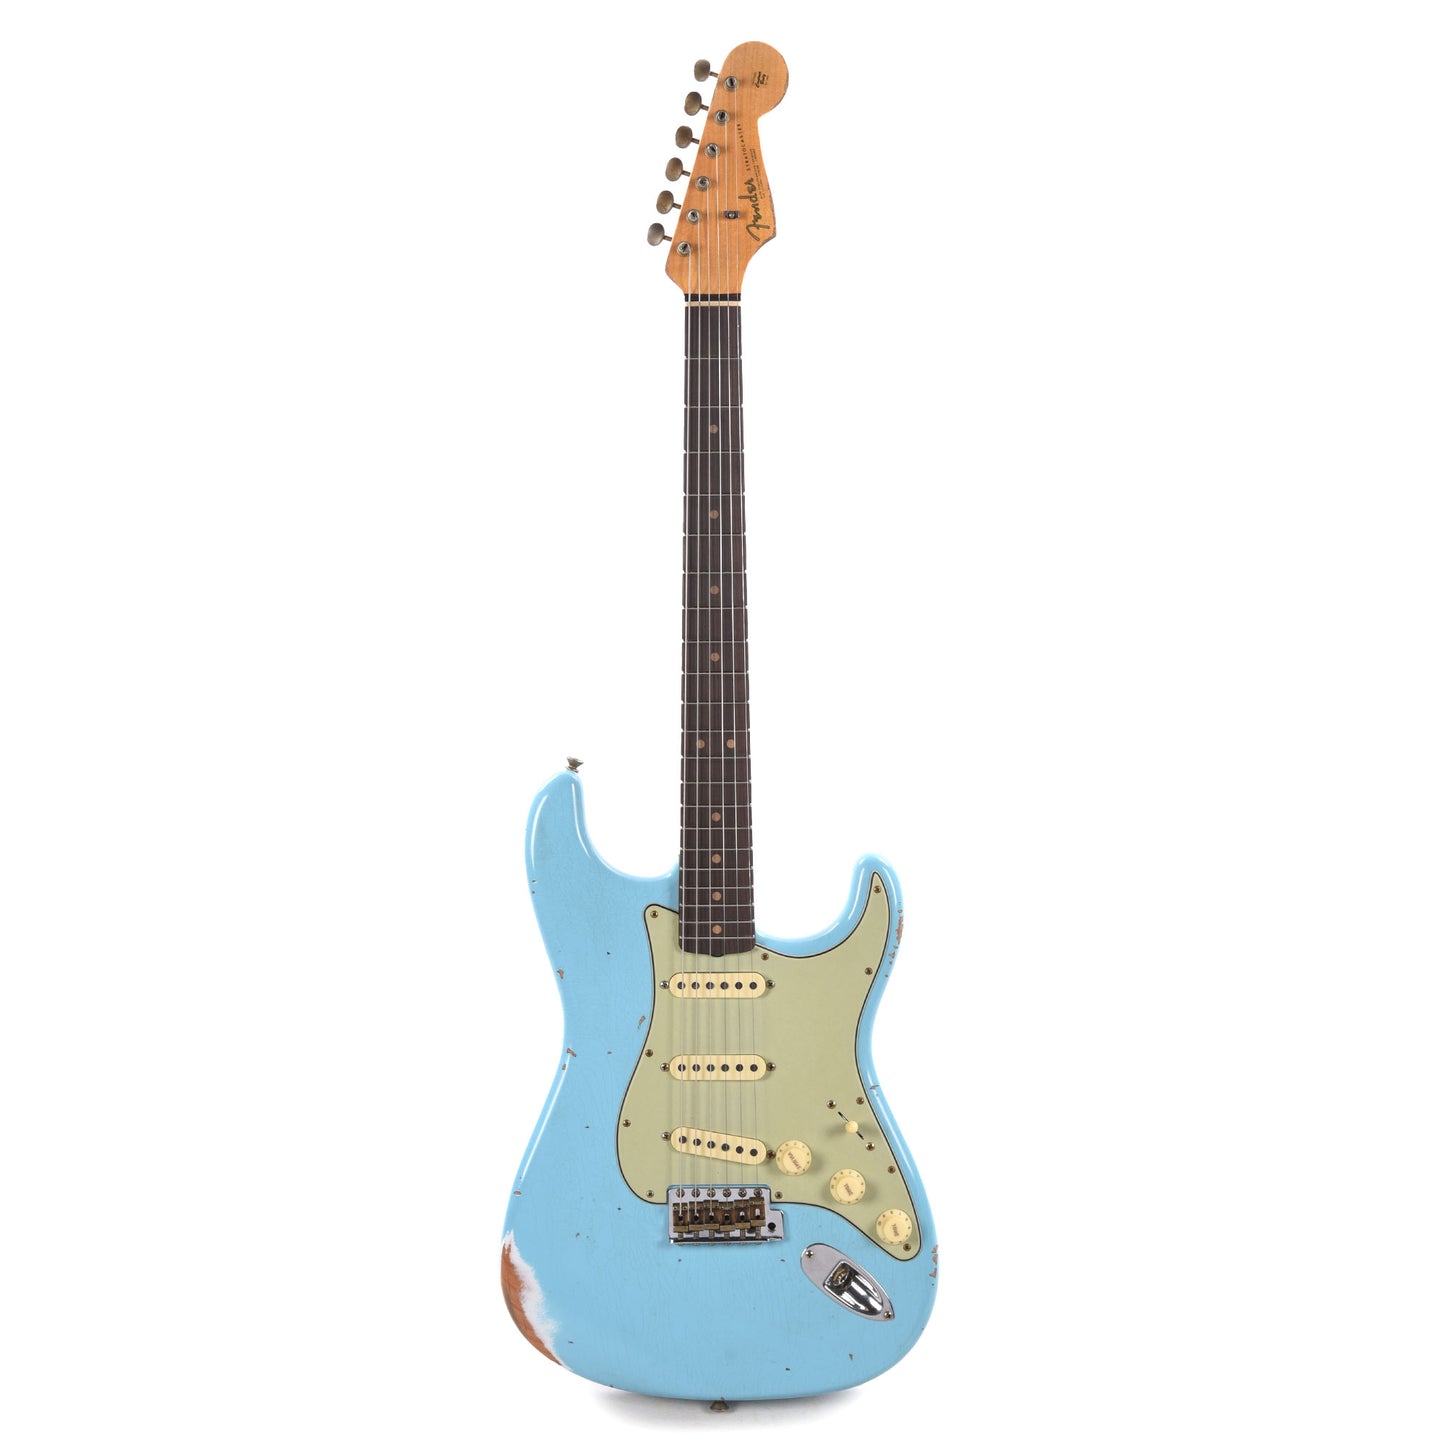 Fender Custom Shop Limited Edition 1964 L-Series Stratocaster Heavy Relic Aged Daphne Blue